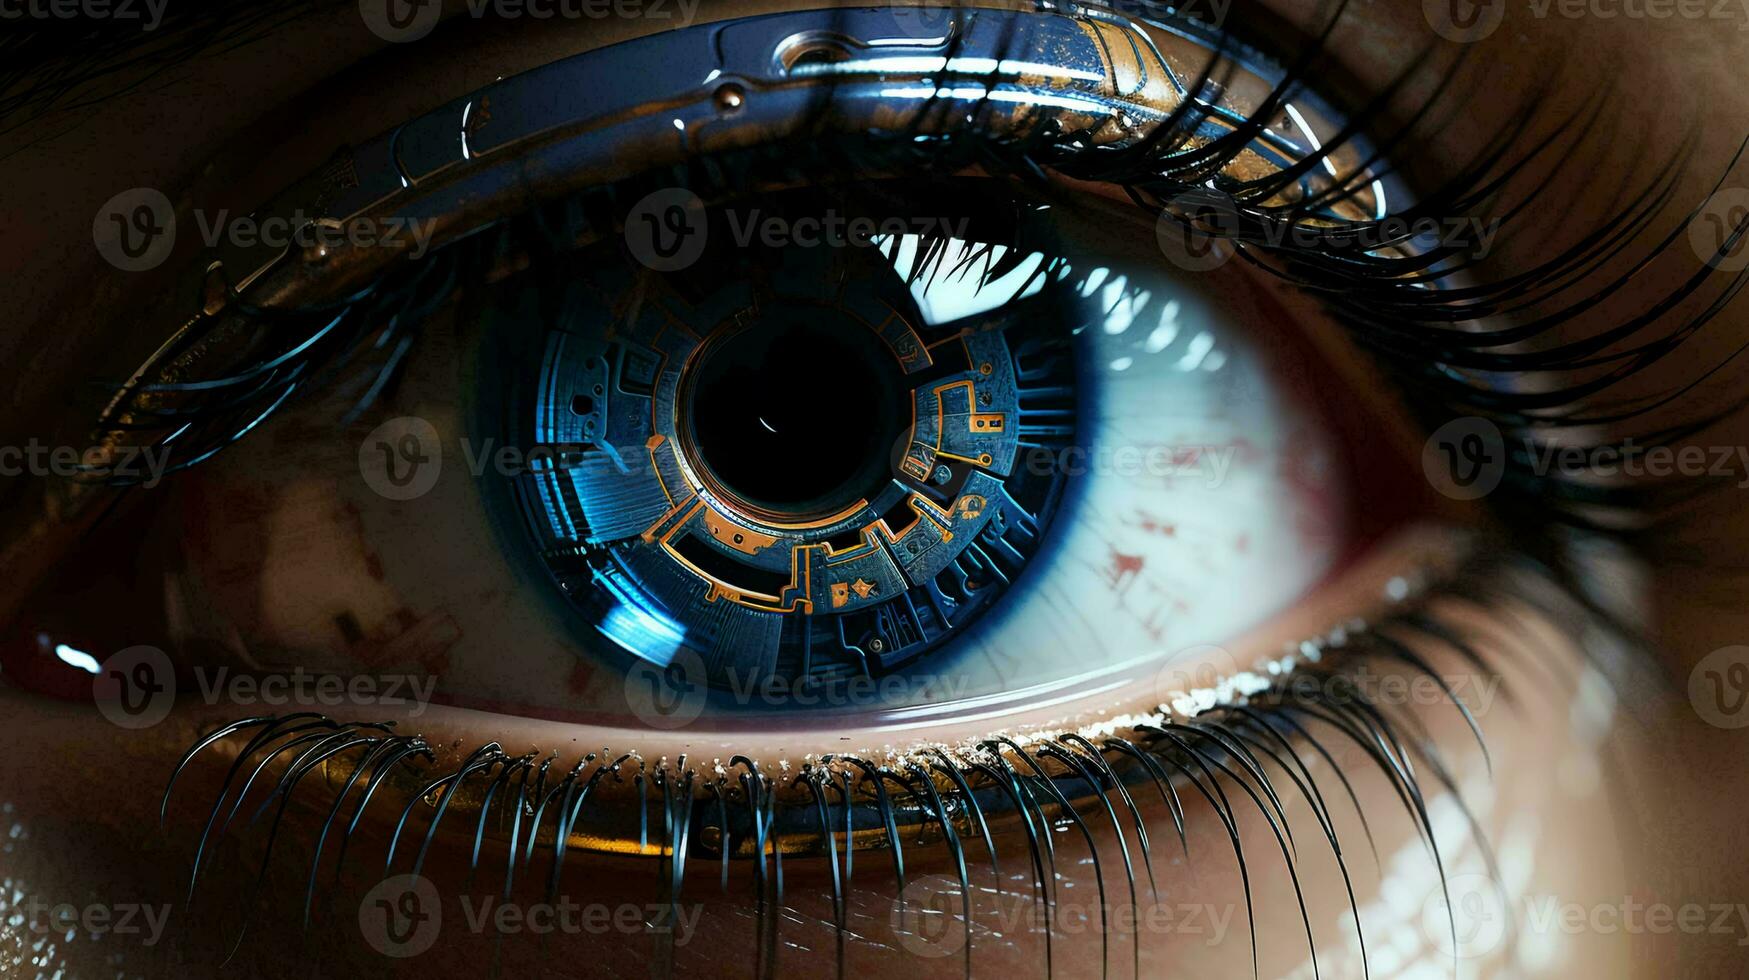 A close view of the high-tech eye. Retinal scanning for personal identification. Concept of laser vision correction, scanning and computer vision photo